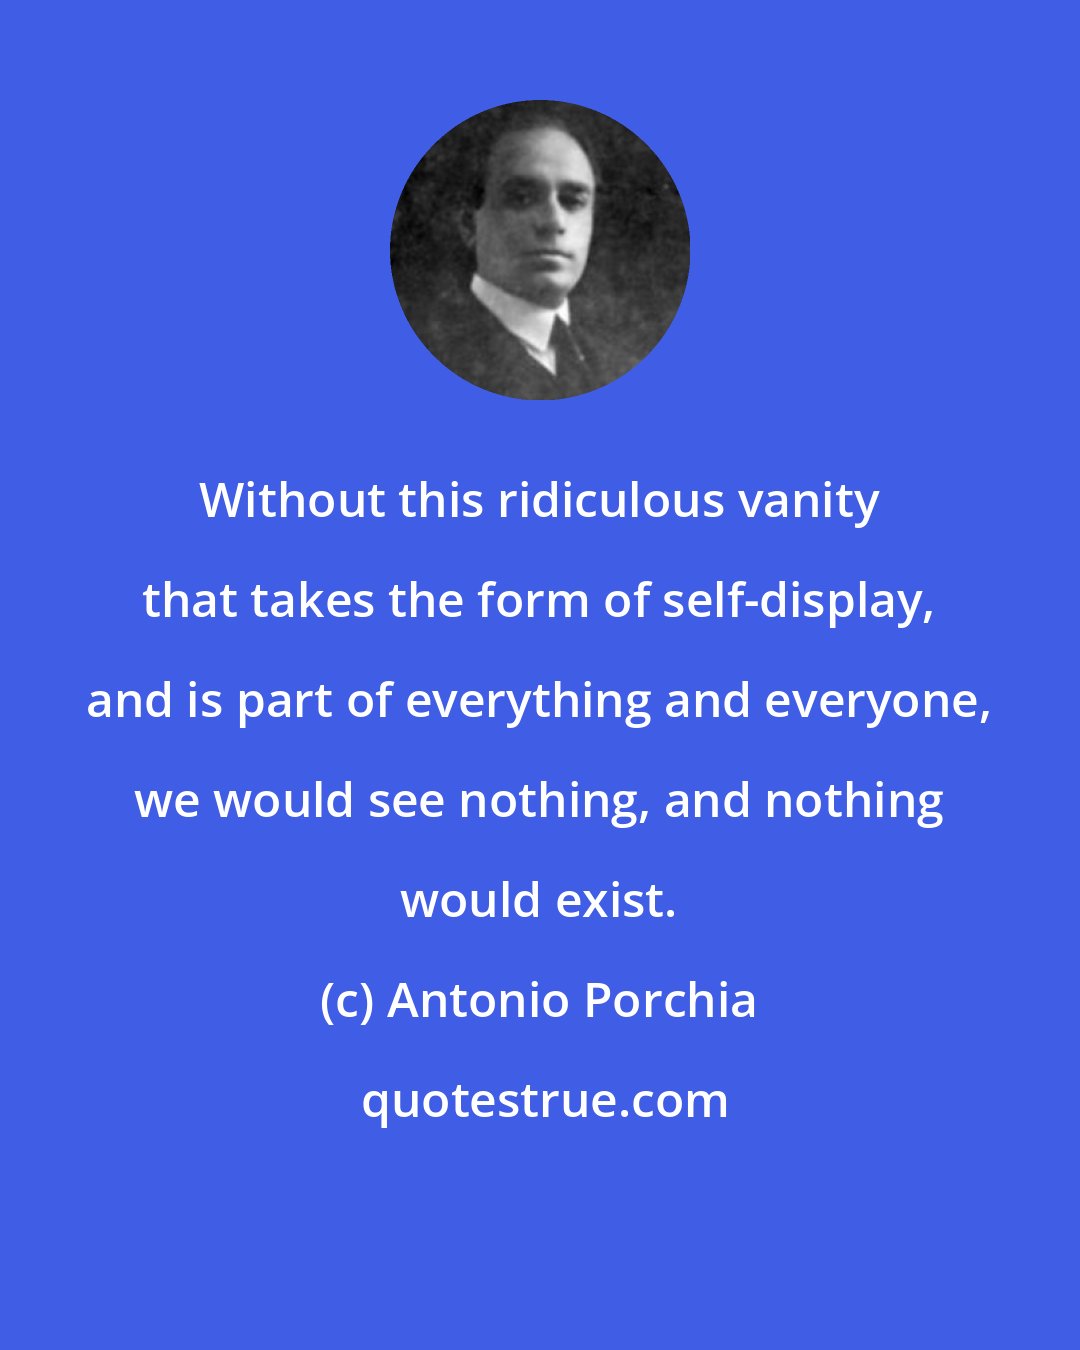 Antonio Porchia: Without this ridiculous vanity that takes the form of self-display, and is part of everything and everyone, we would see nothing, and nothing would exist.